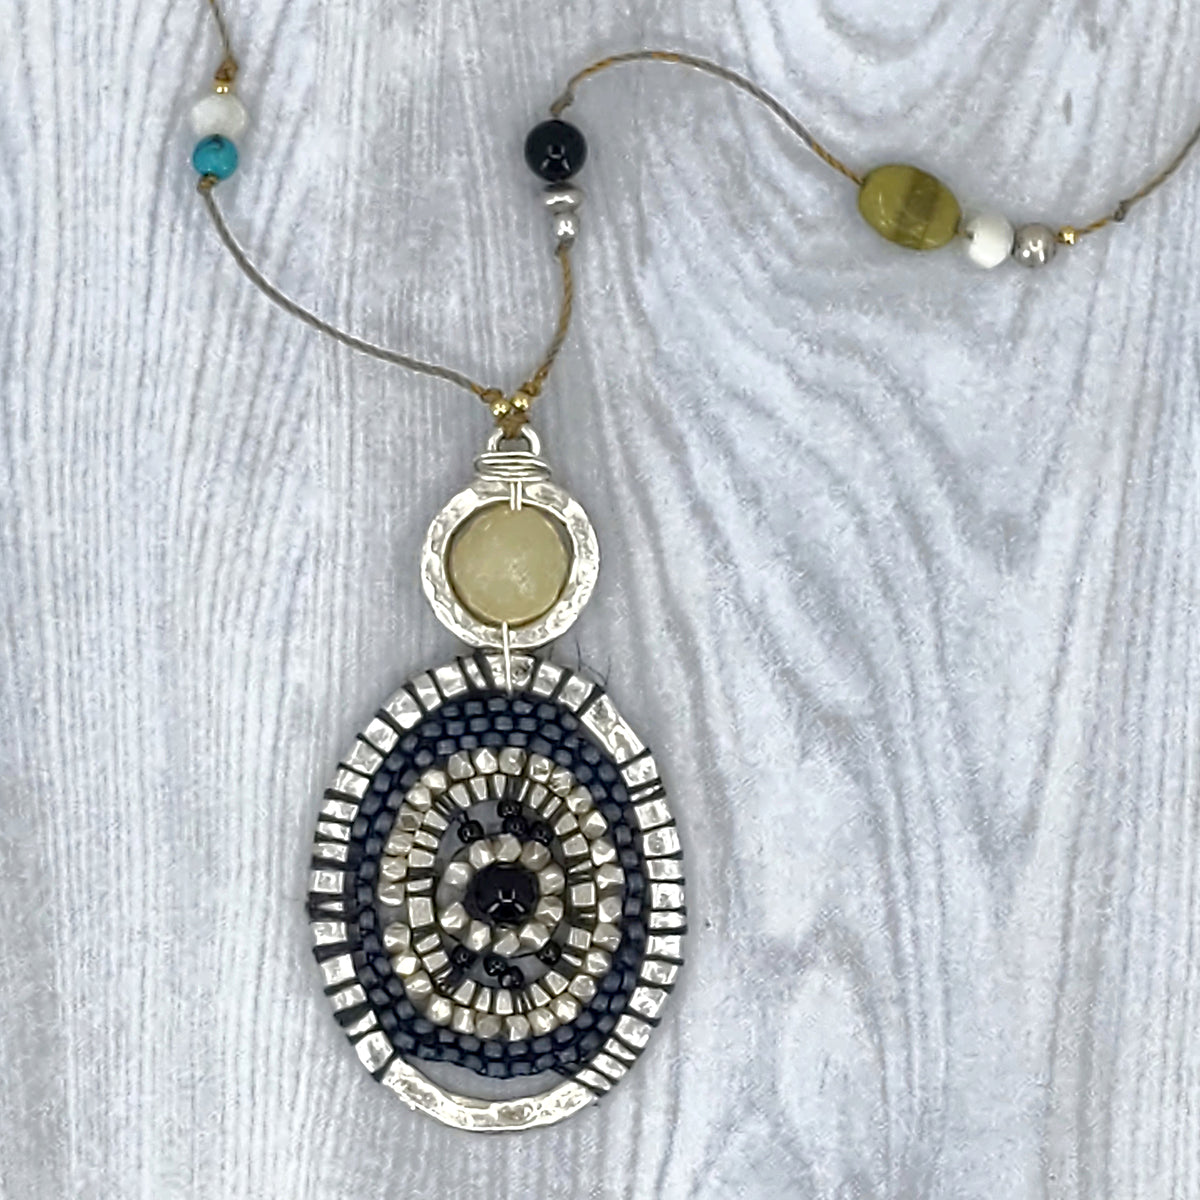 Concentric Sedona Necklace